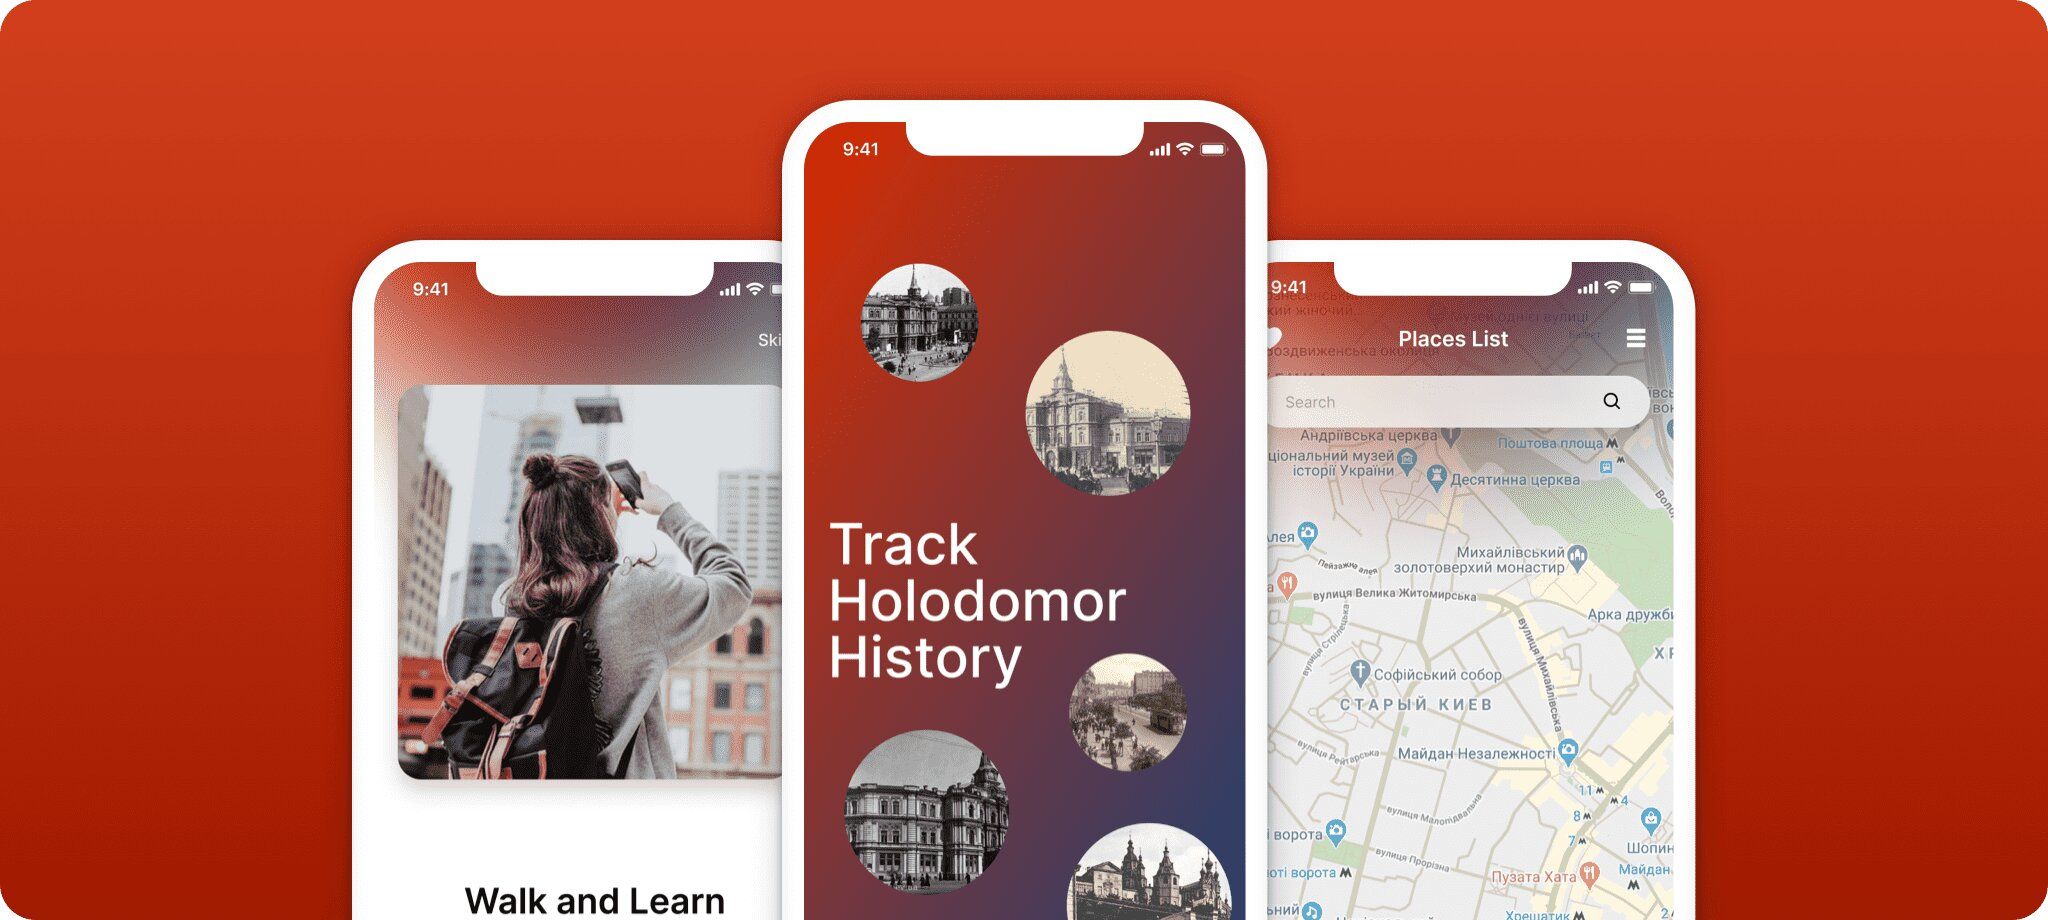 Track Holodomor History app provides great tours all around Kyiv &amp; an interactive history learning experience